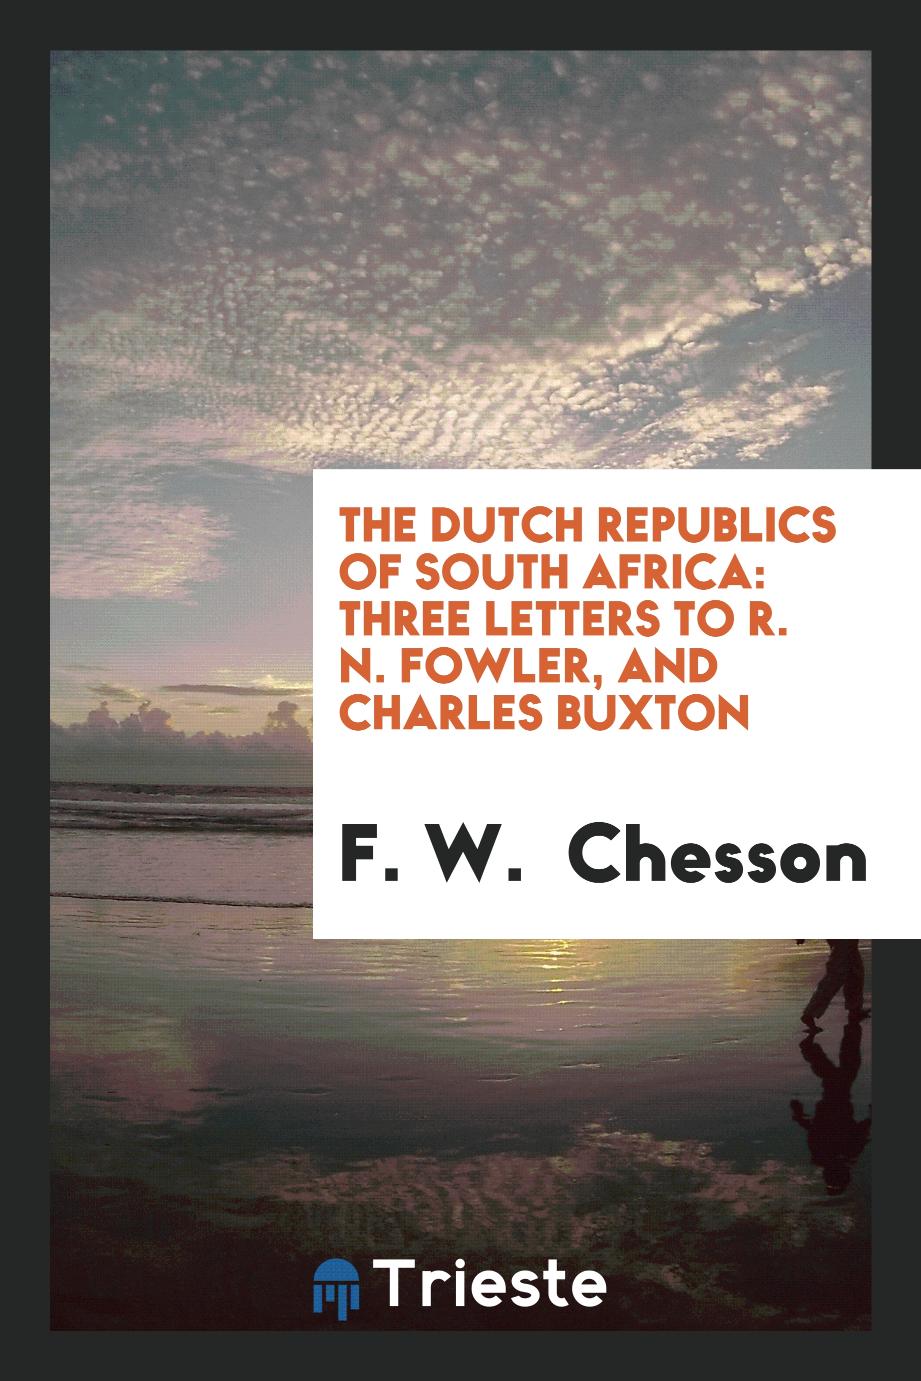 The Dutch Republics of South Africa: Three Letters to R. N. Fowler, and Charles Buxton